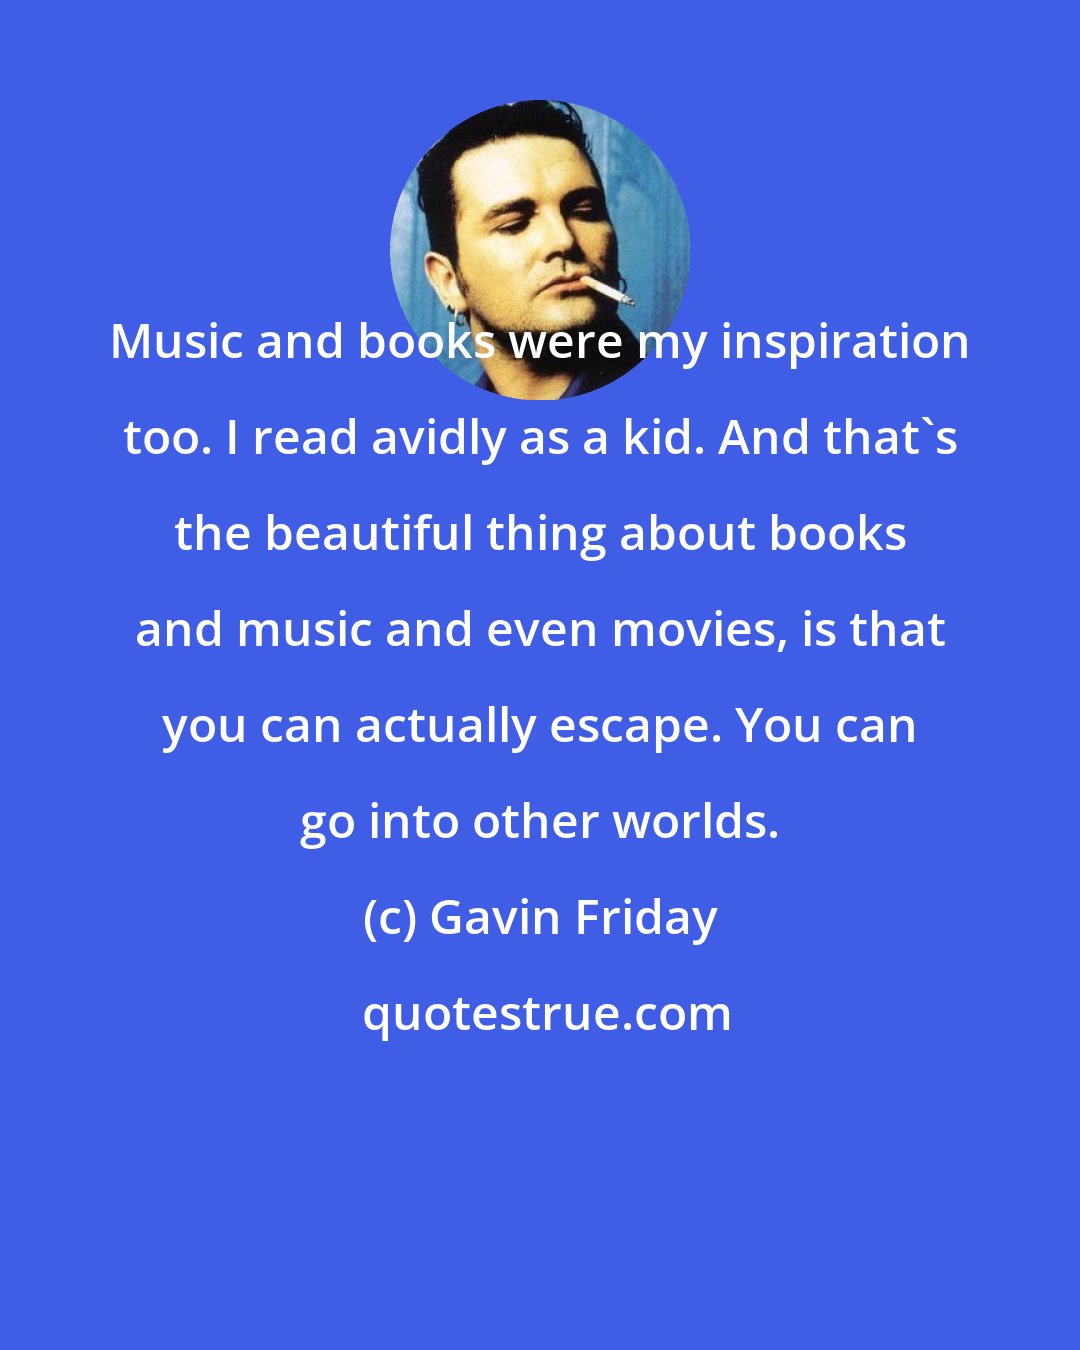 Gavin Friday: Music and books were my inspiration too. I read avidly as a kid. And that's the beautiful thing about books and music and even movies, is that you can actually escape. You can go into other worlds.